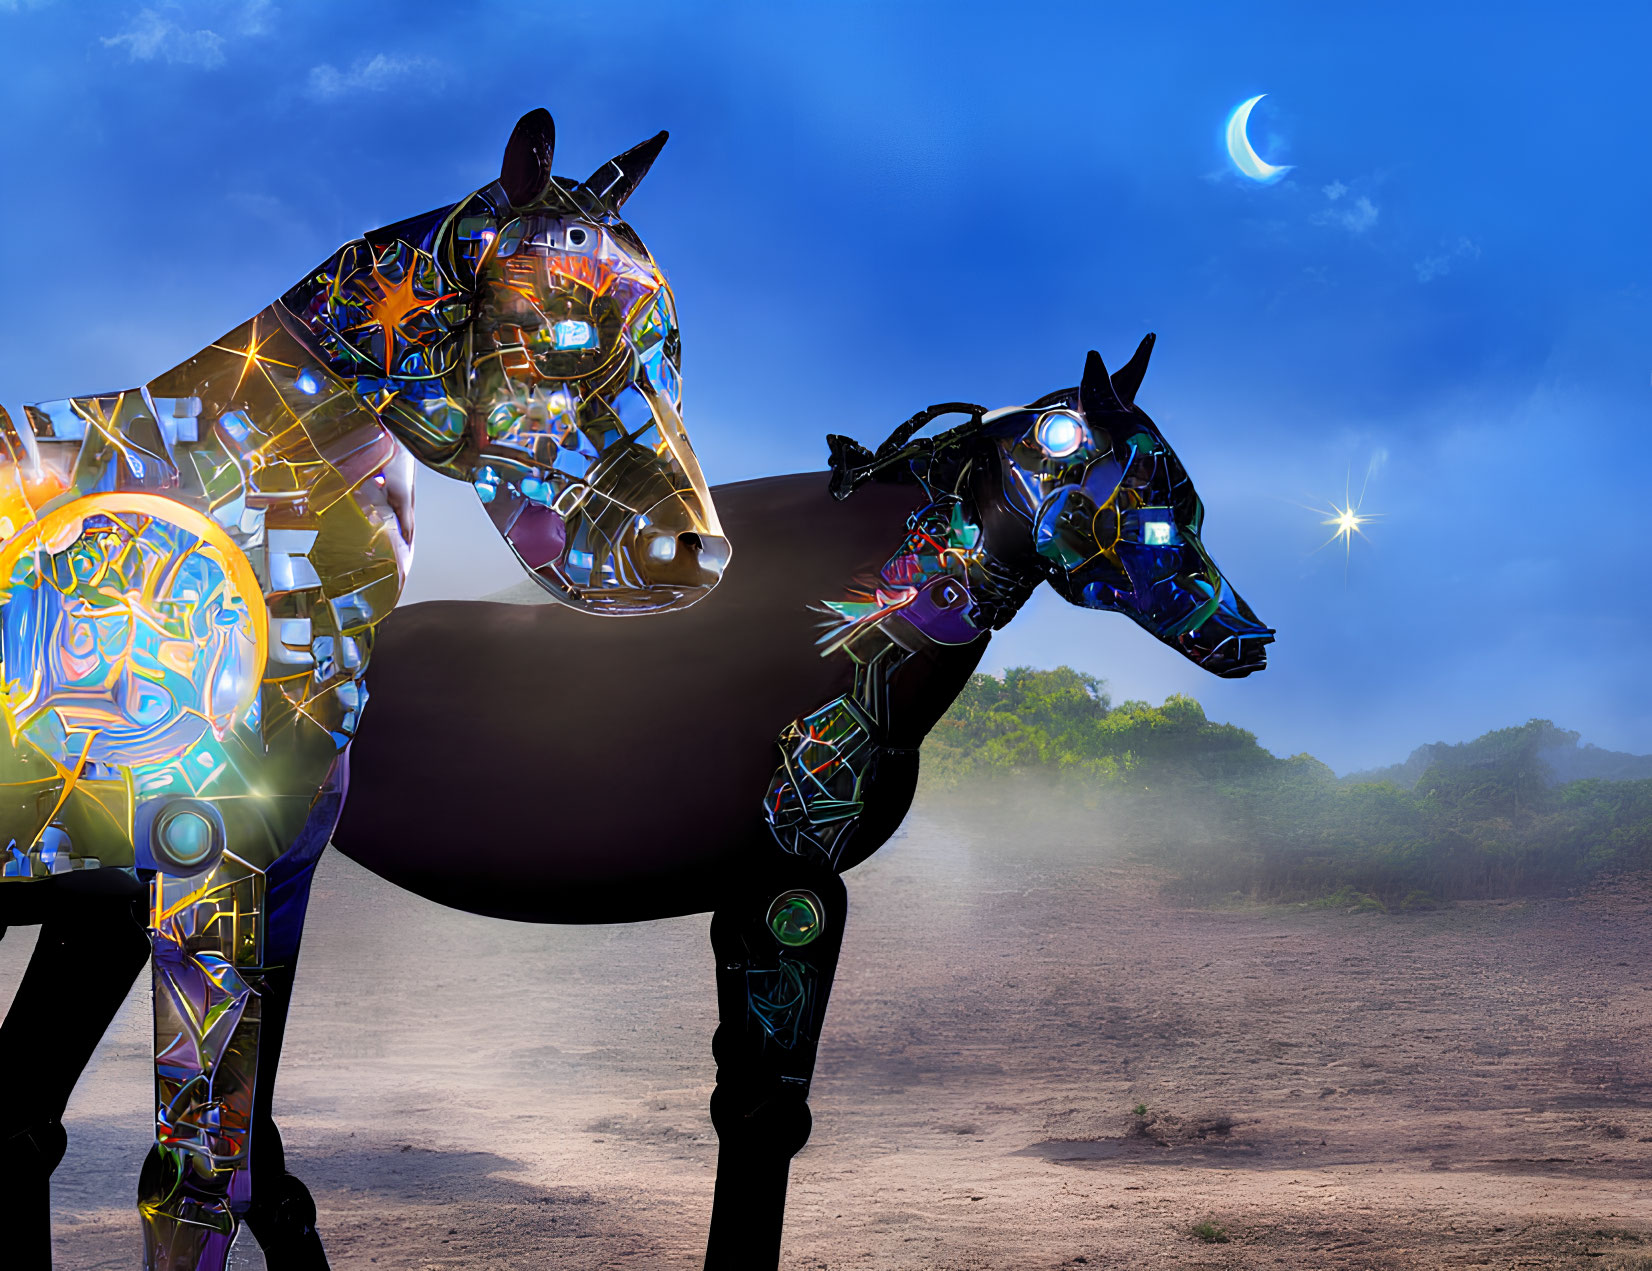 Digital Artwork: Two Horses with Circuitry Designs on Transparent Body